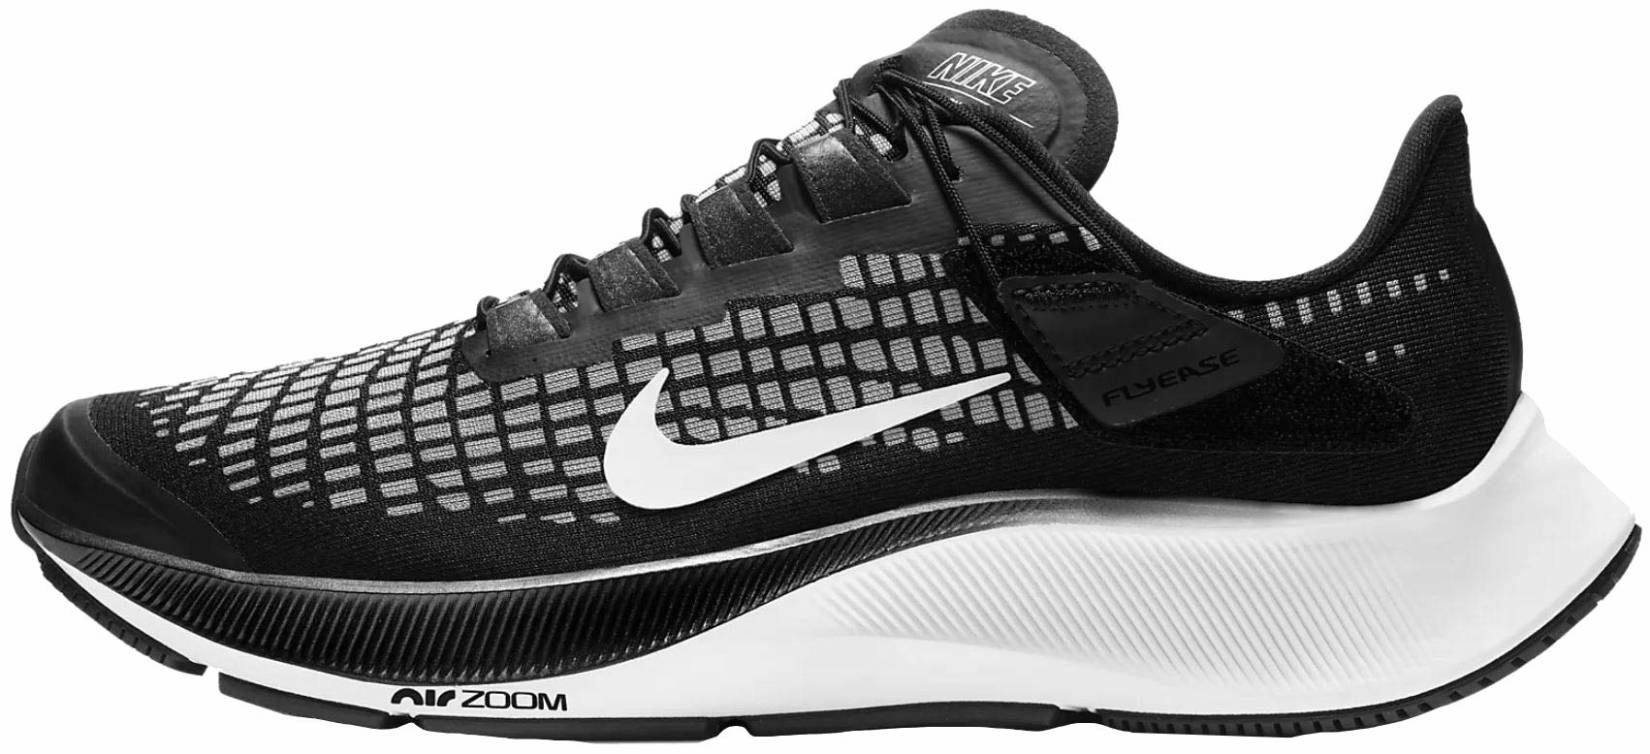 Nike Air Zoom Pegasus 37 FlyEase - Deals ($100), Facts, Reviews ...